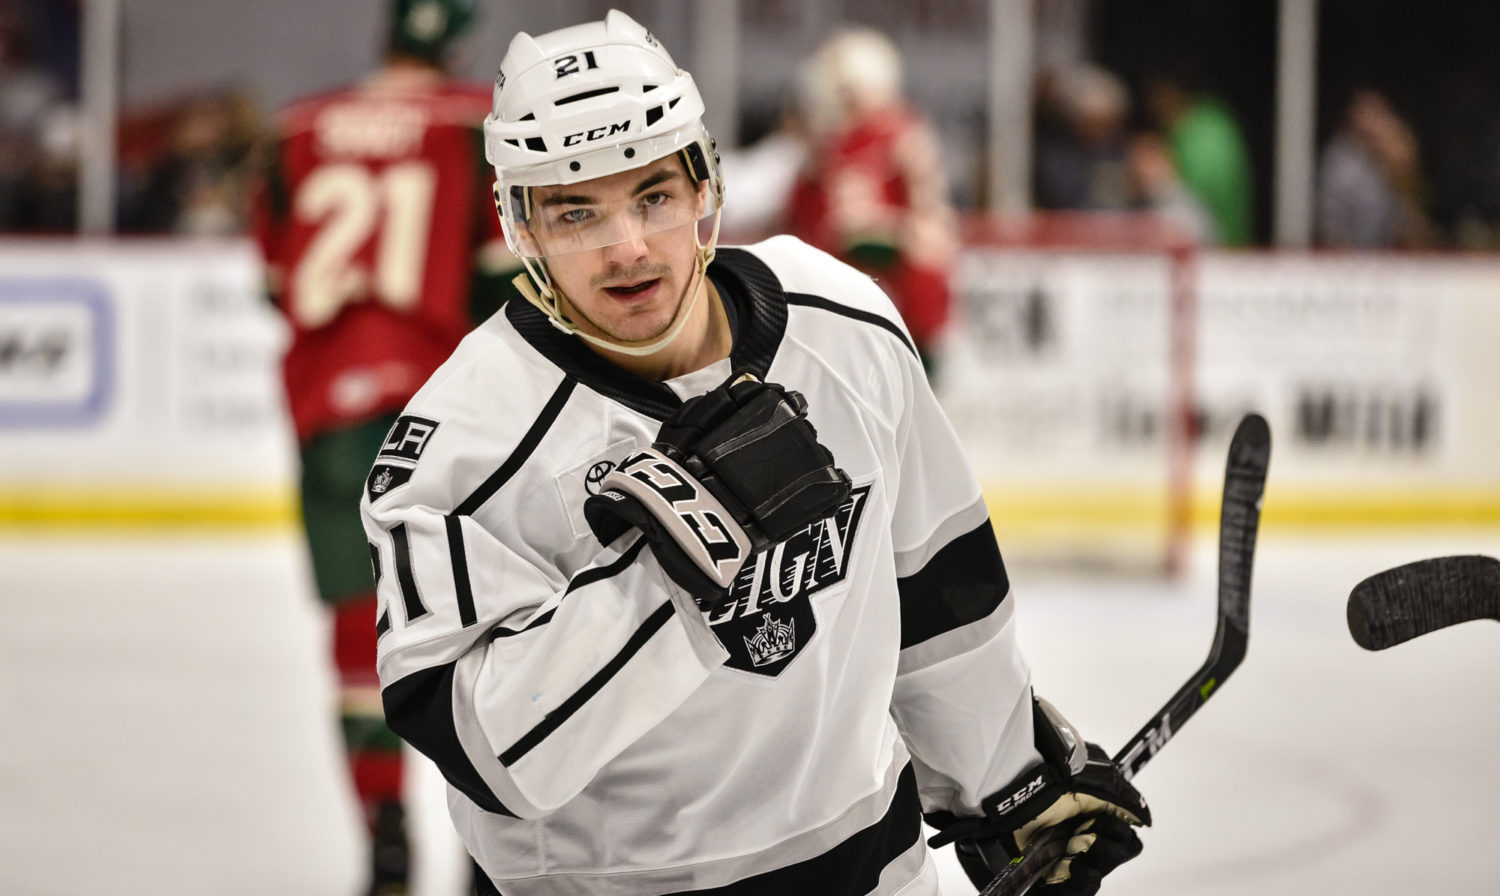 Reign forward Mikey Eyssimont and his battle with Crohn #39 s Disease LA